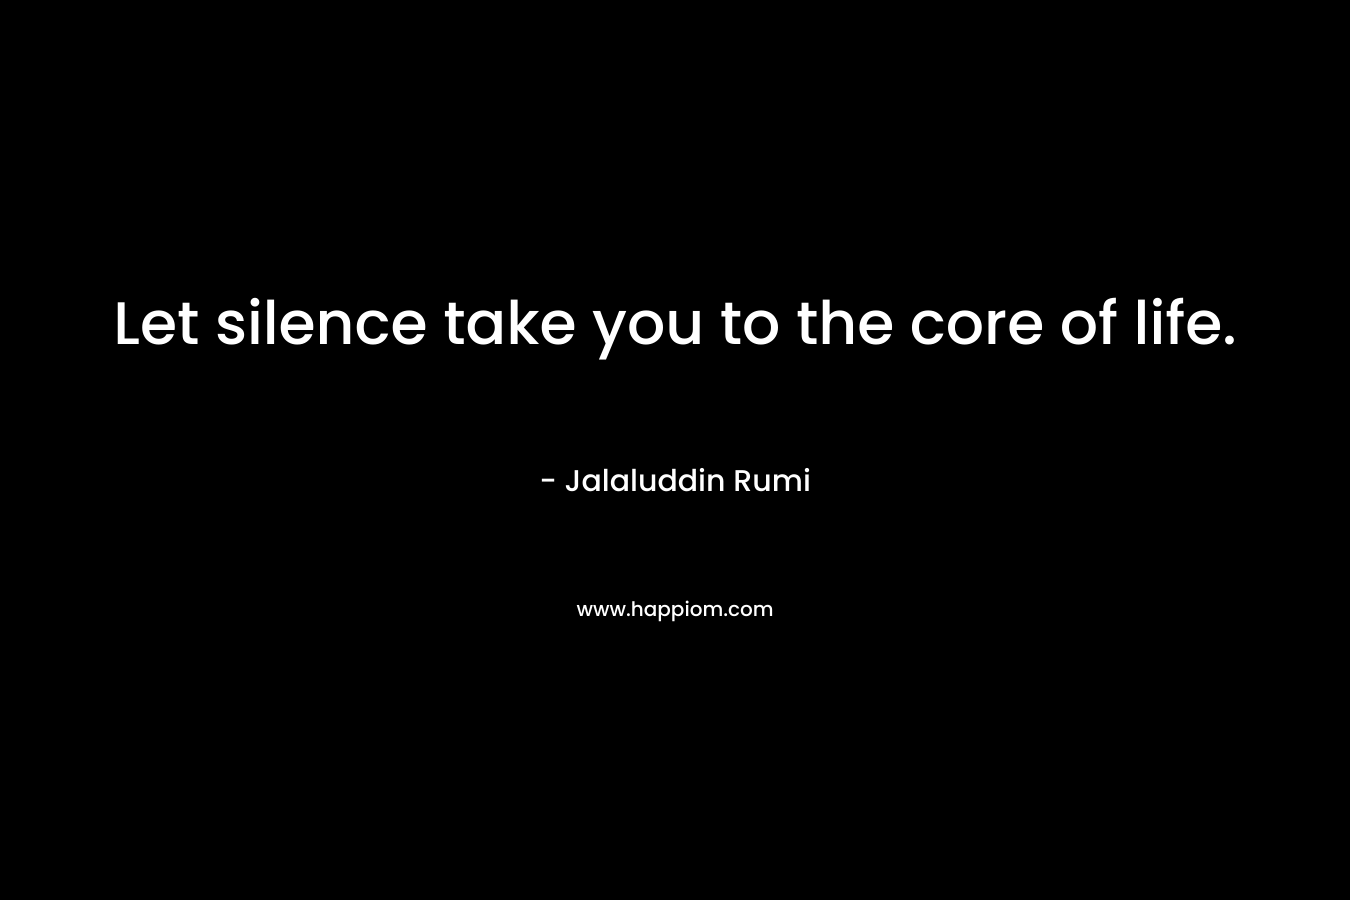 Let silence take you to the core of life.